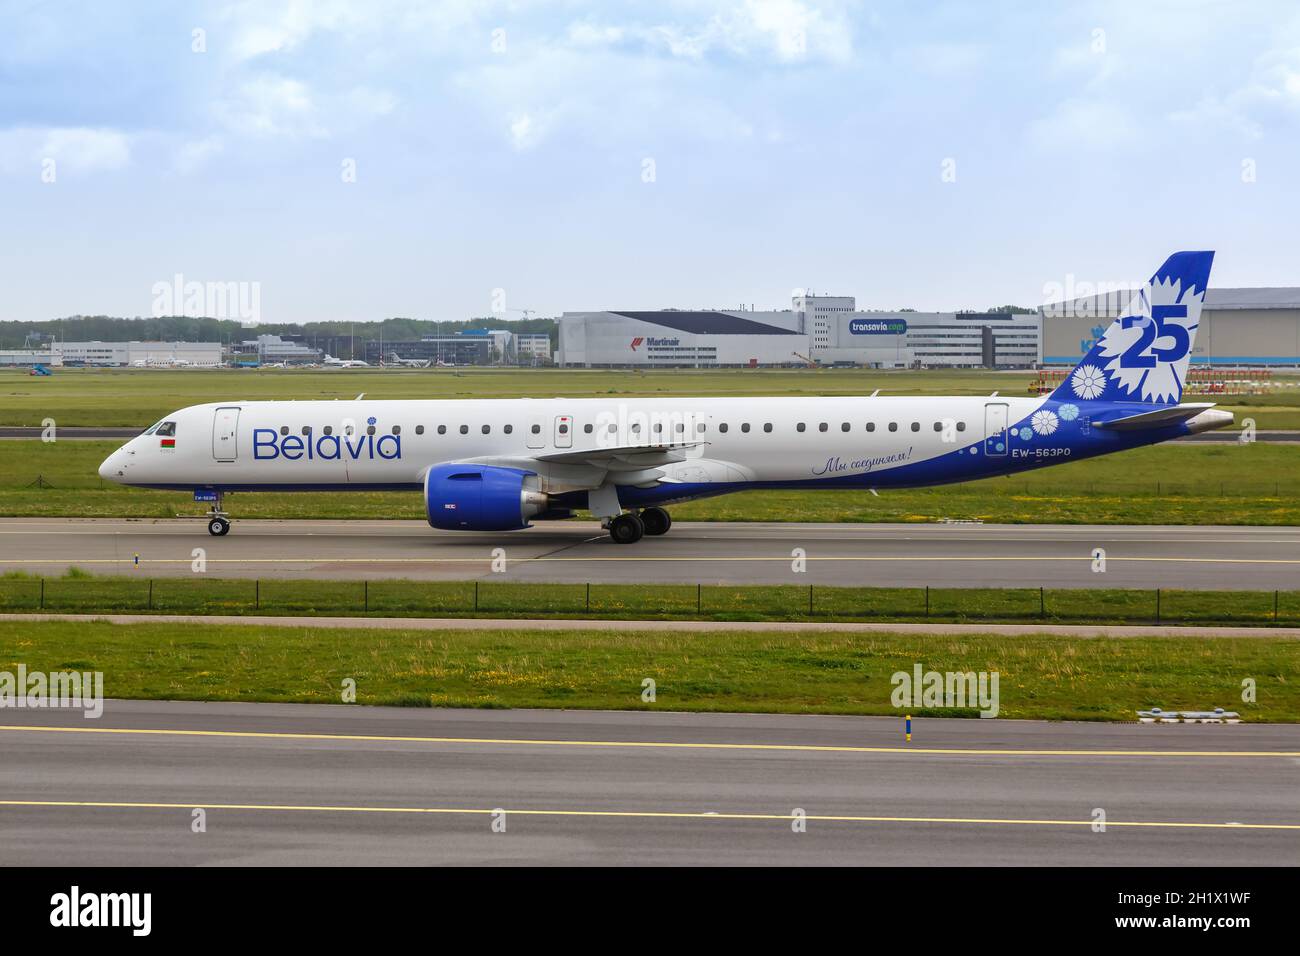 Amsterdam, Netherlands - May 21, 2021: Belavia Embraer 195 E2 airplane at Amsterdam Schiphol airport (AMS) in the Netherlands. Stock Photo